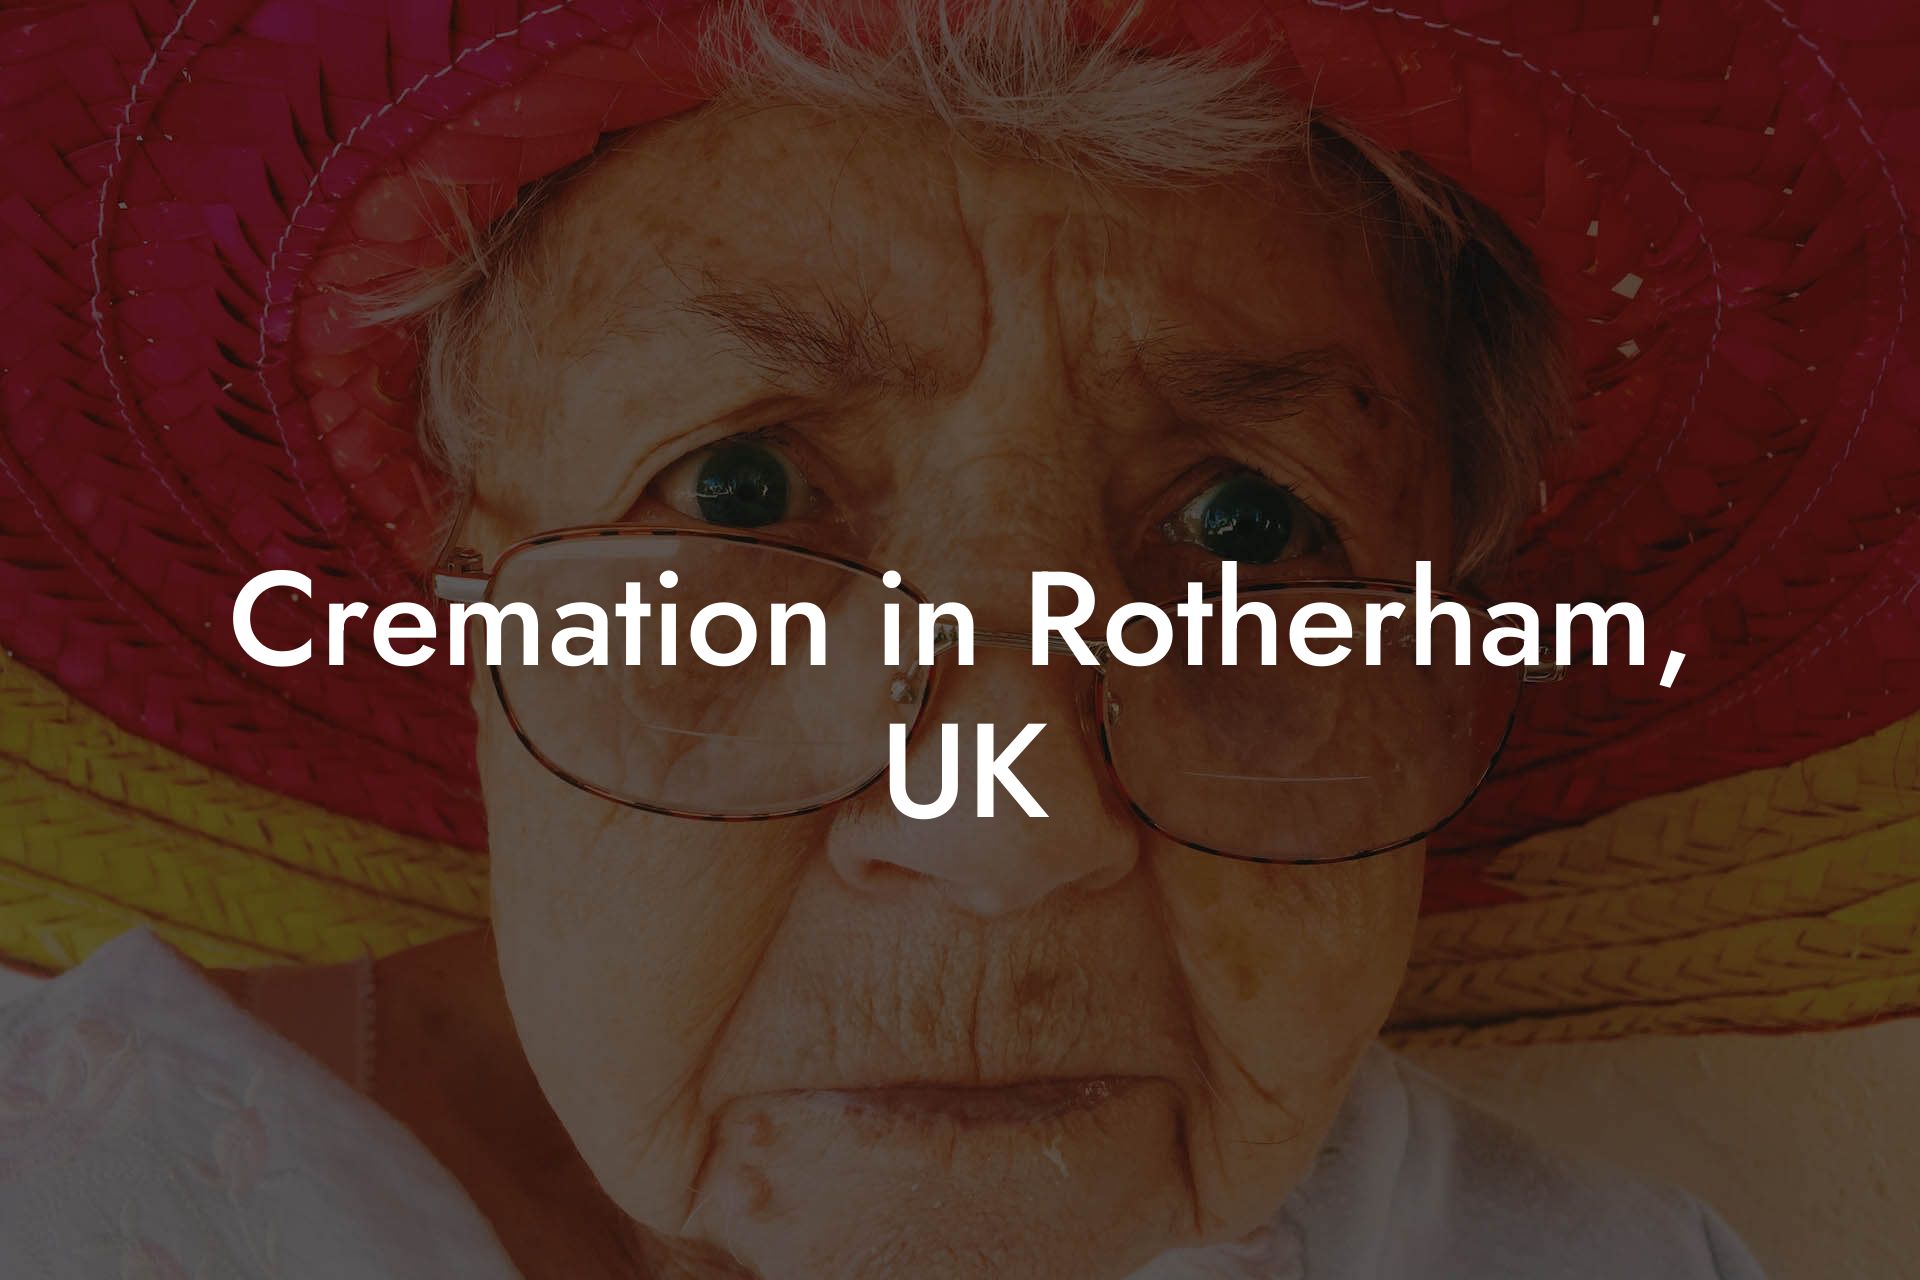 Cremation in Rotherham, UK